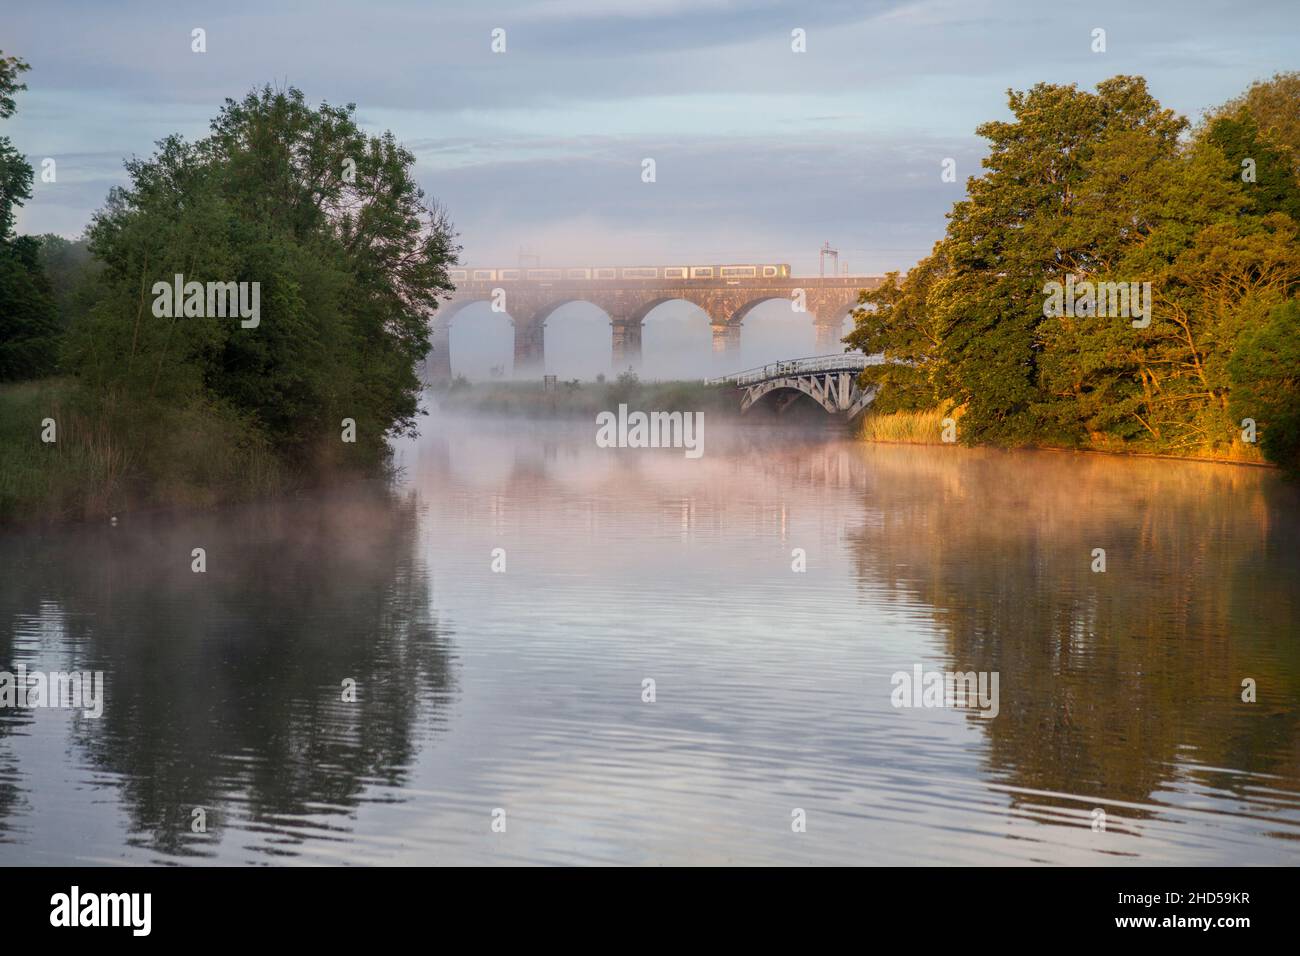 London North western railway class 350 electric train crossing Dutton viaduct  over the Weaver navigation, Cheshire on a misty morning Stock Photo